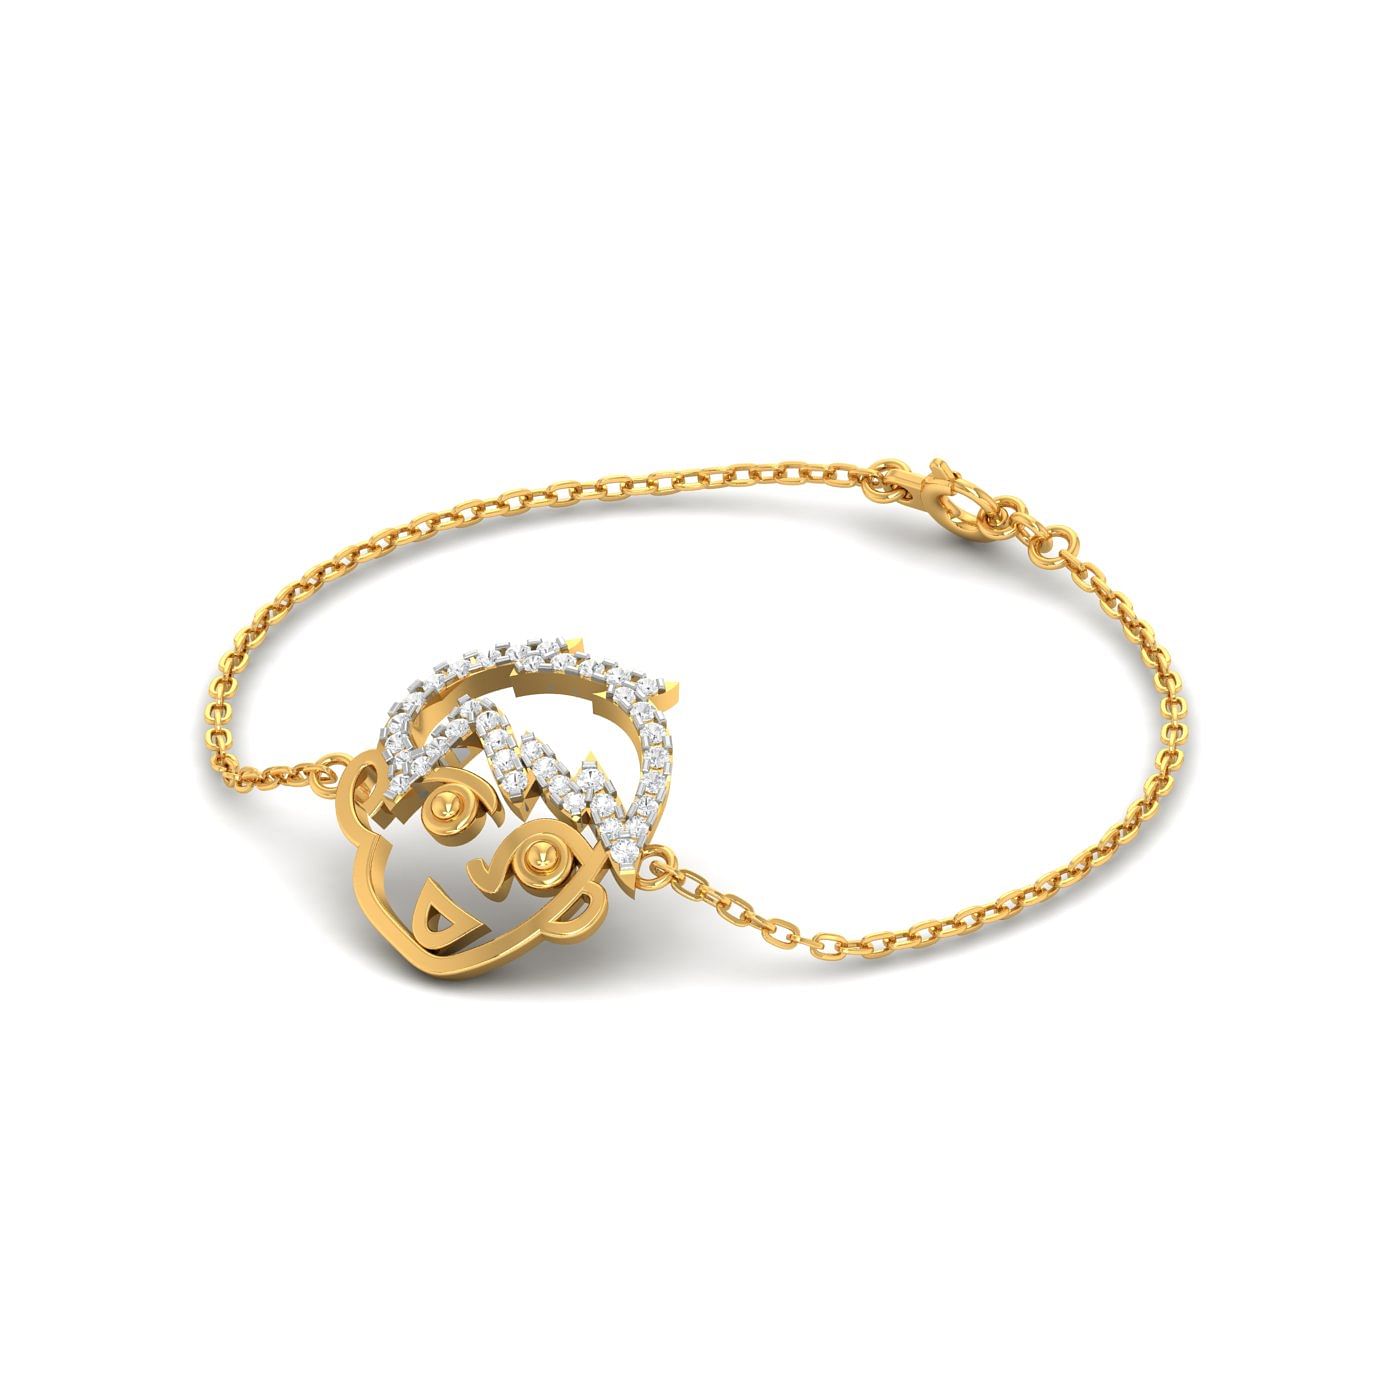 Gold Circle Bracelet Set For Baby Girls 4 10 Arab, Middle Eastern, African  Fashion Jewelry Metal Pakistani Gold Bangles Q0717 From Sihuai05, $12.48 |  DHgate.Com